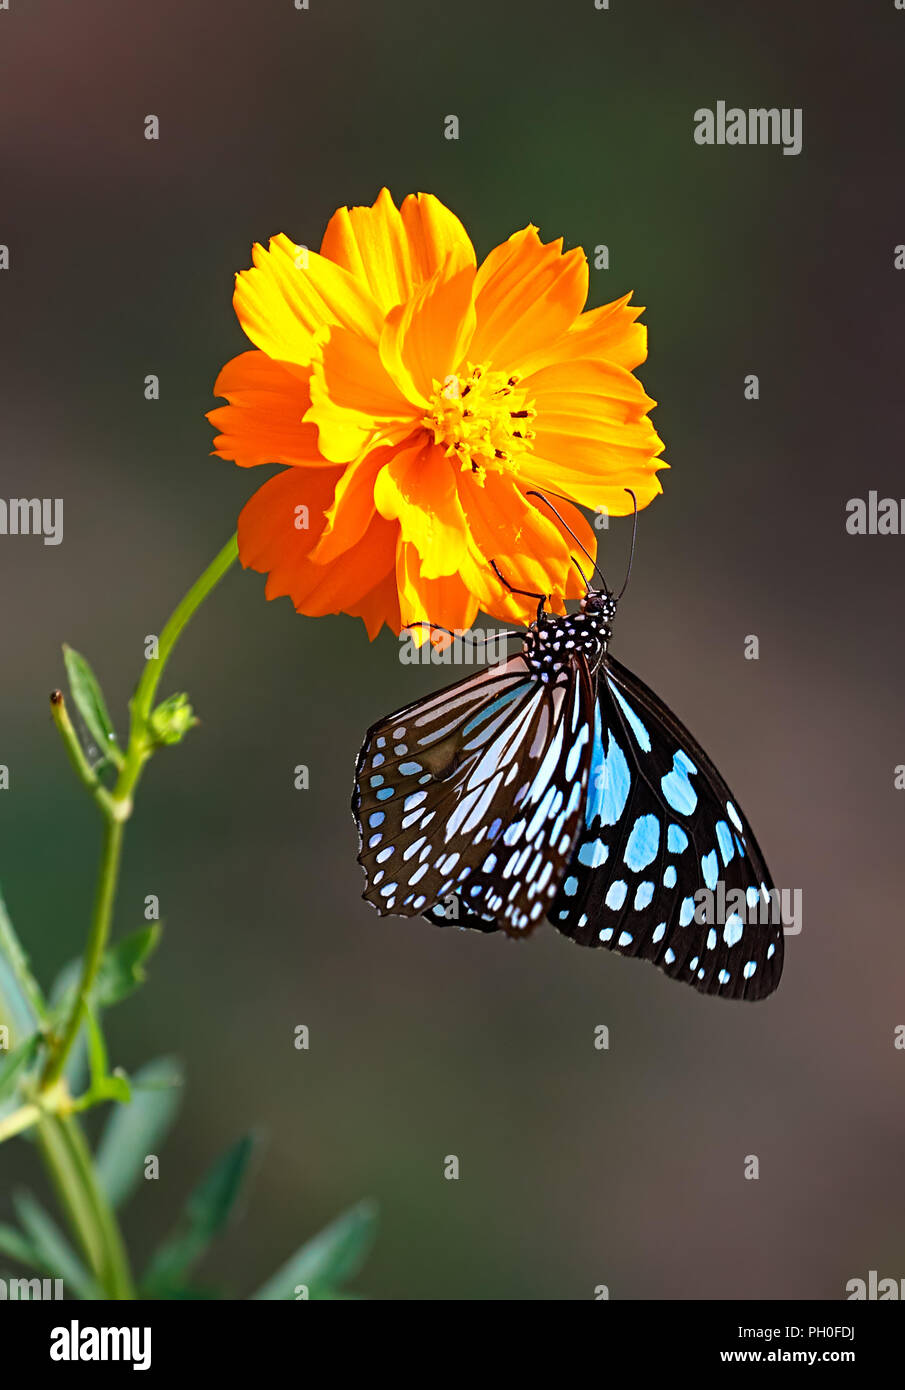 Blue tiger butterfly or Danaid Tirumala limniace hanging on an orange double Cosmos flower. Stock Photo